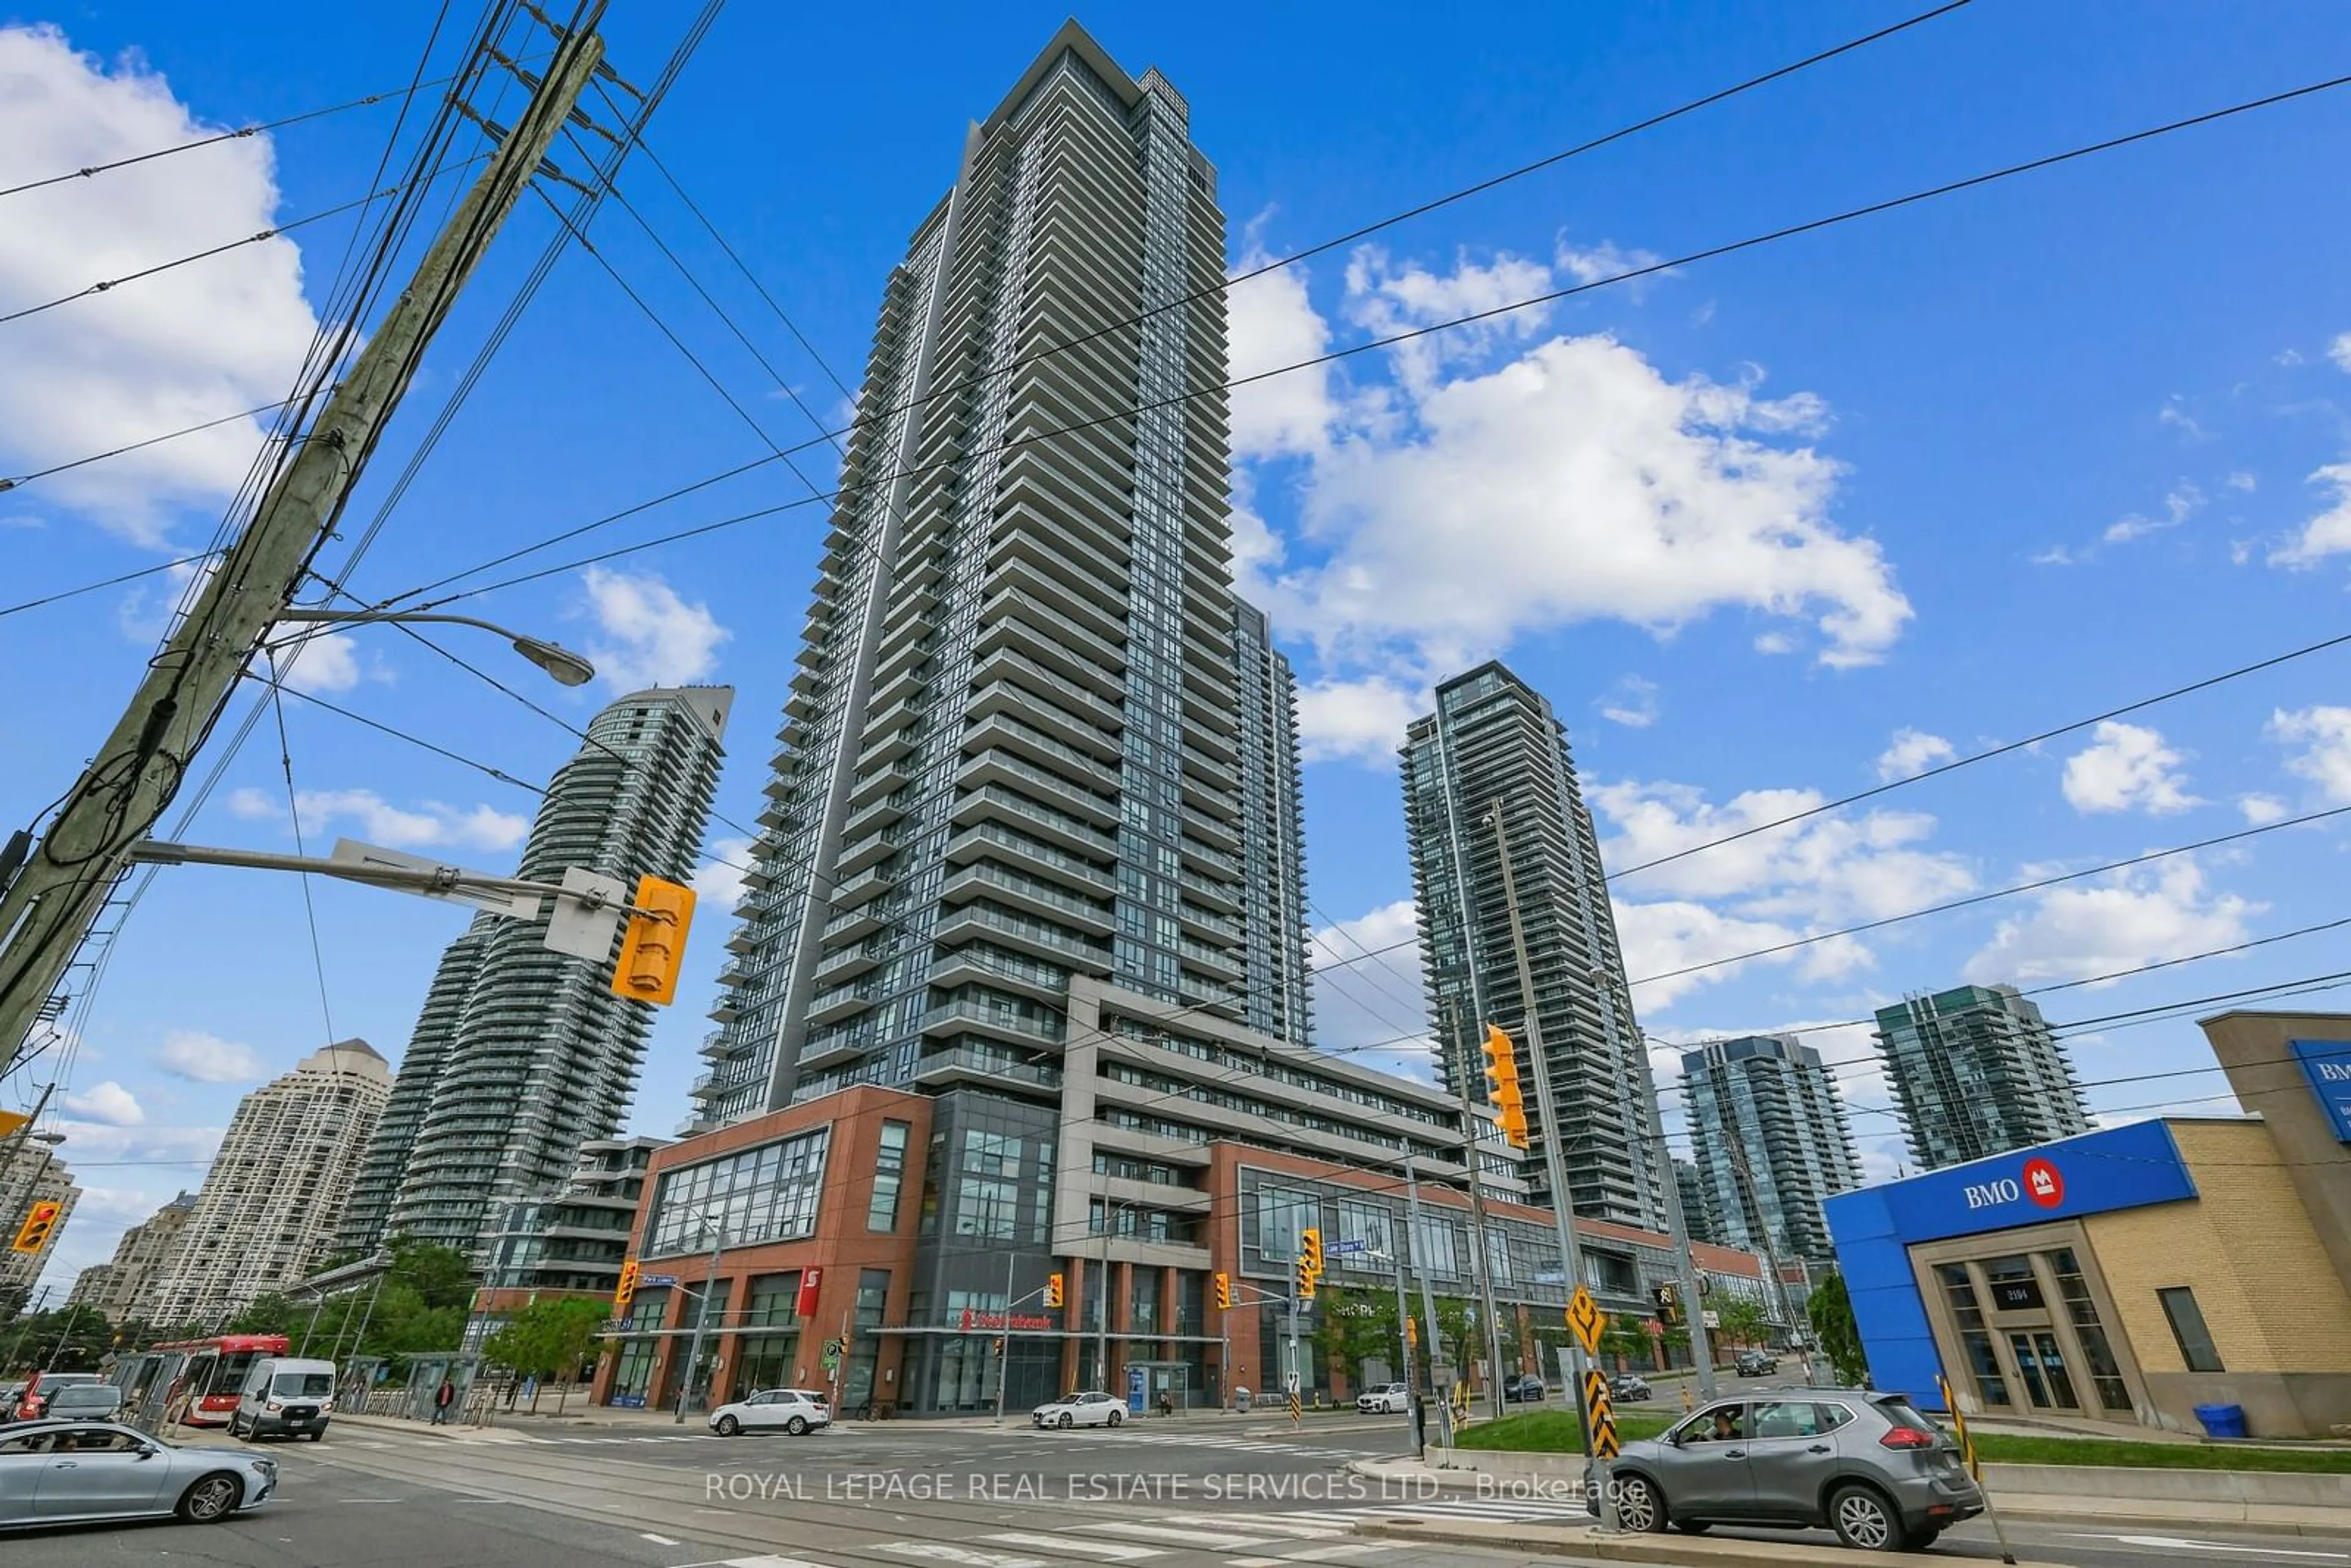 A pic from exterior of the house or condo for 2200 Lakeshore Blvd #3302, Toronto Ontario M8V 1A4